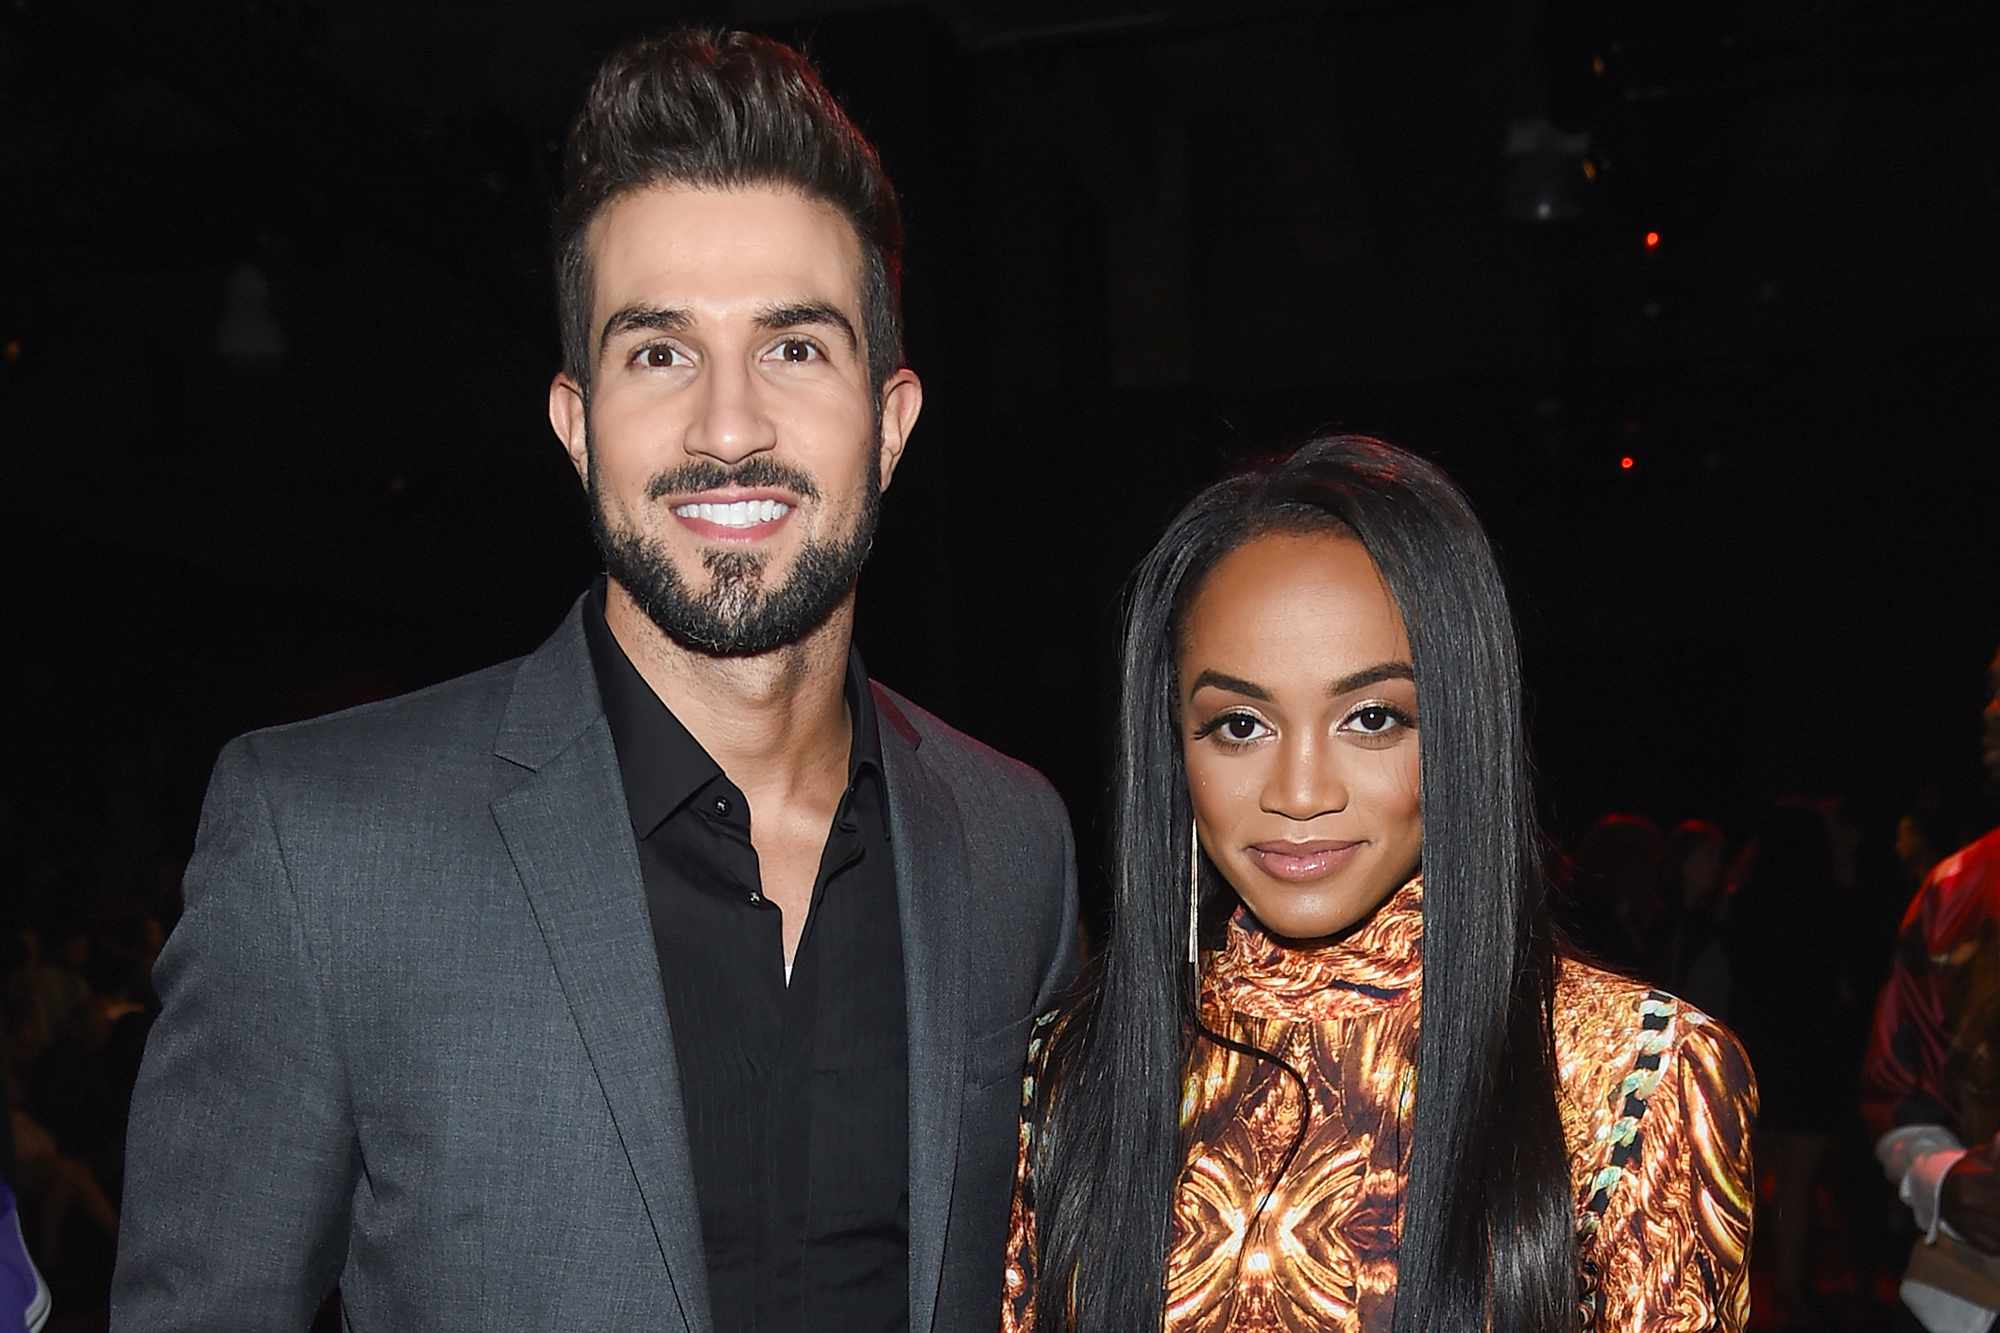 Why Former Bachelorette Rachel Lindsay Regrets Not Having Prenup With Bryan Abasolo: 'We Weren't on the Same Page'